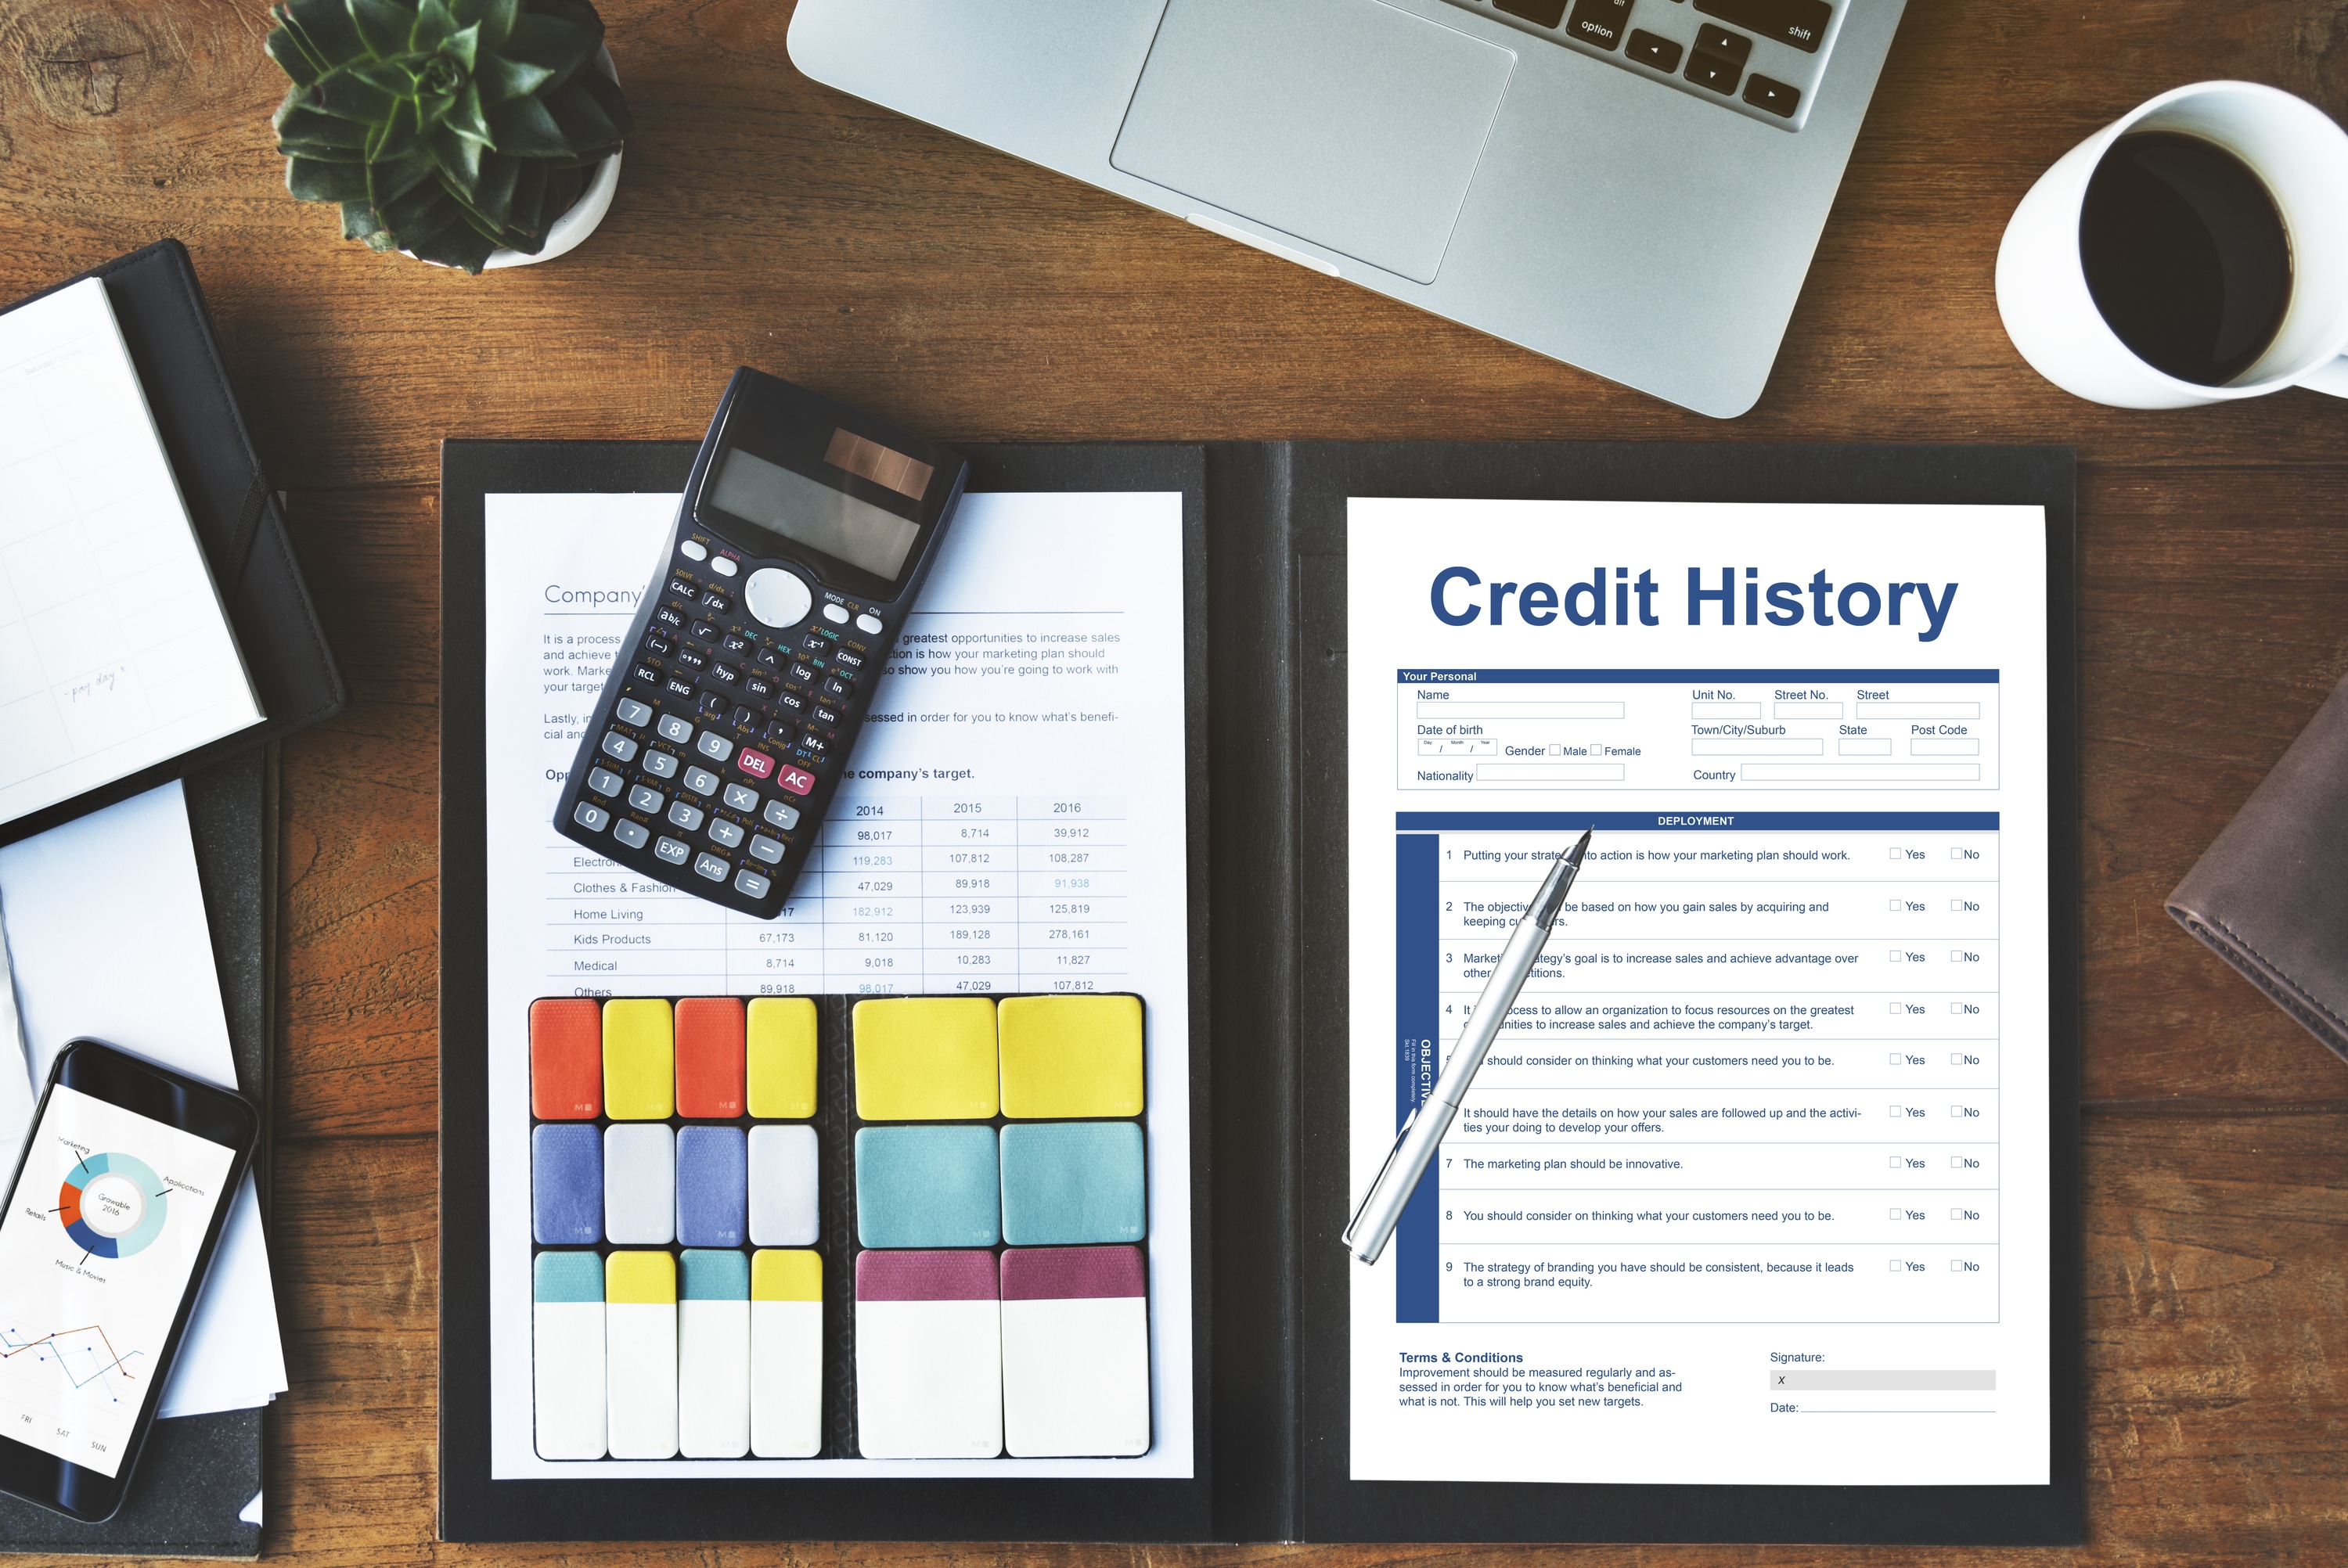 How to Build Your Credit History Fast &#8211; 8 Ways to Establish a Good Score